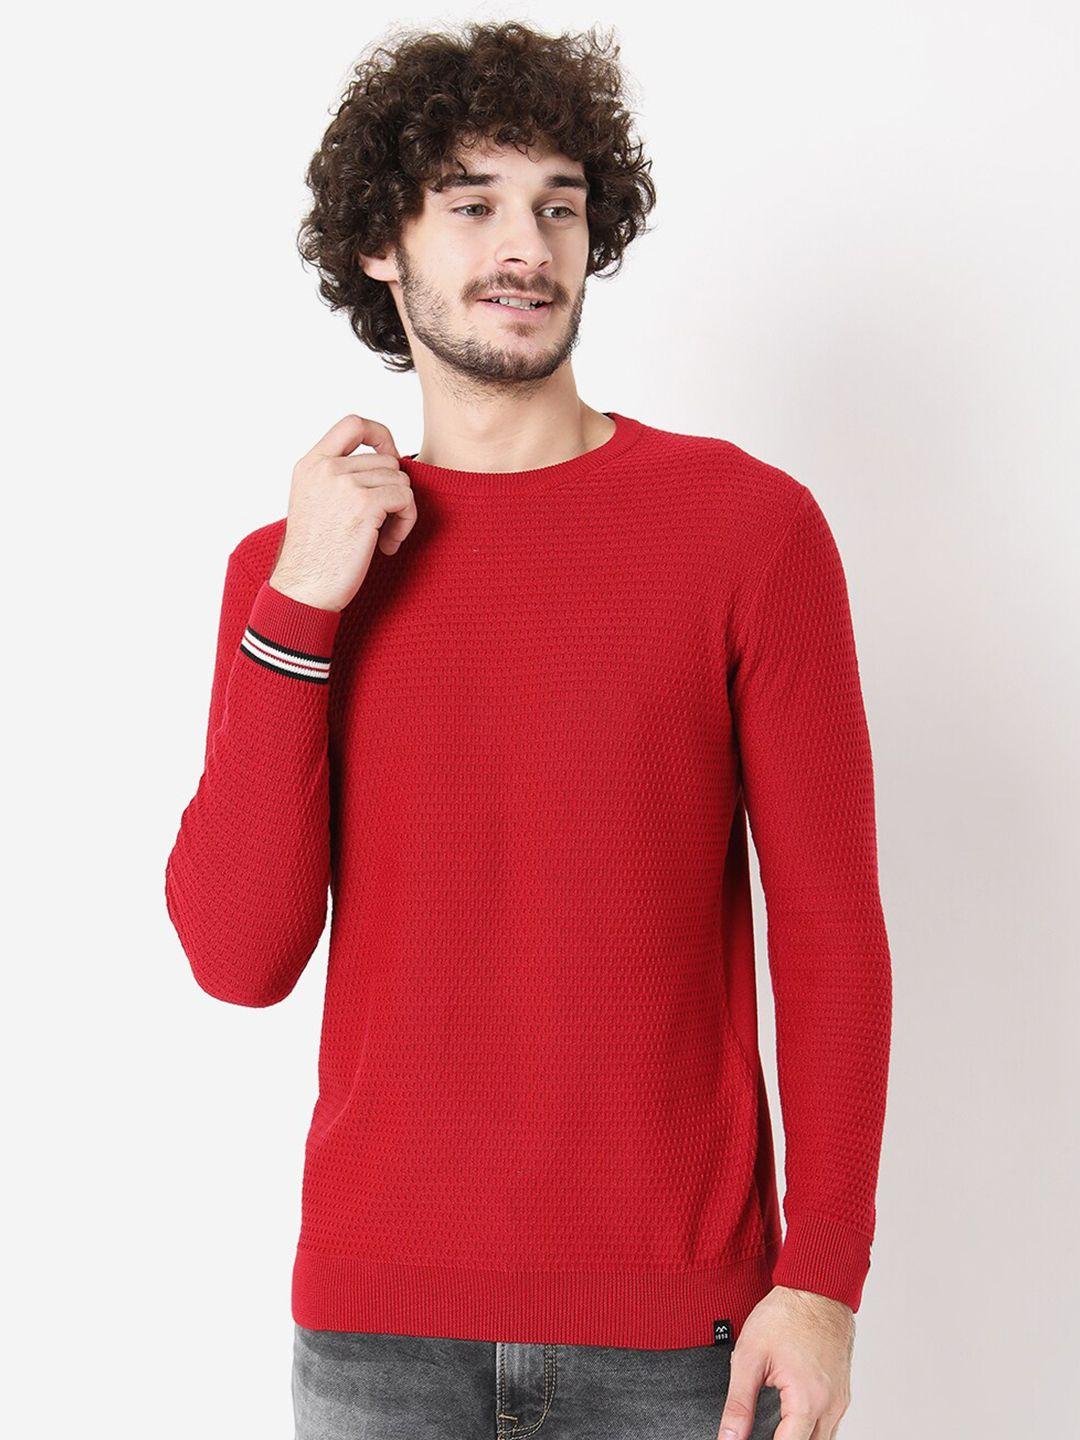 mufti-men-red--round-neck-full-sleeves-pullover